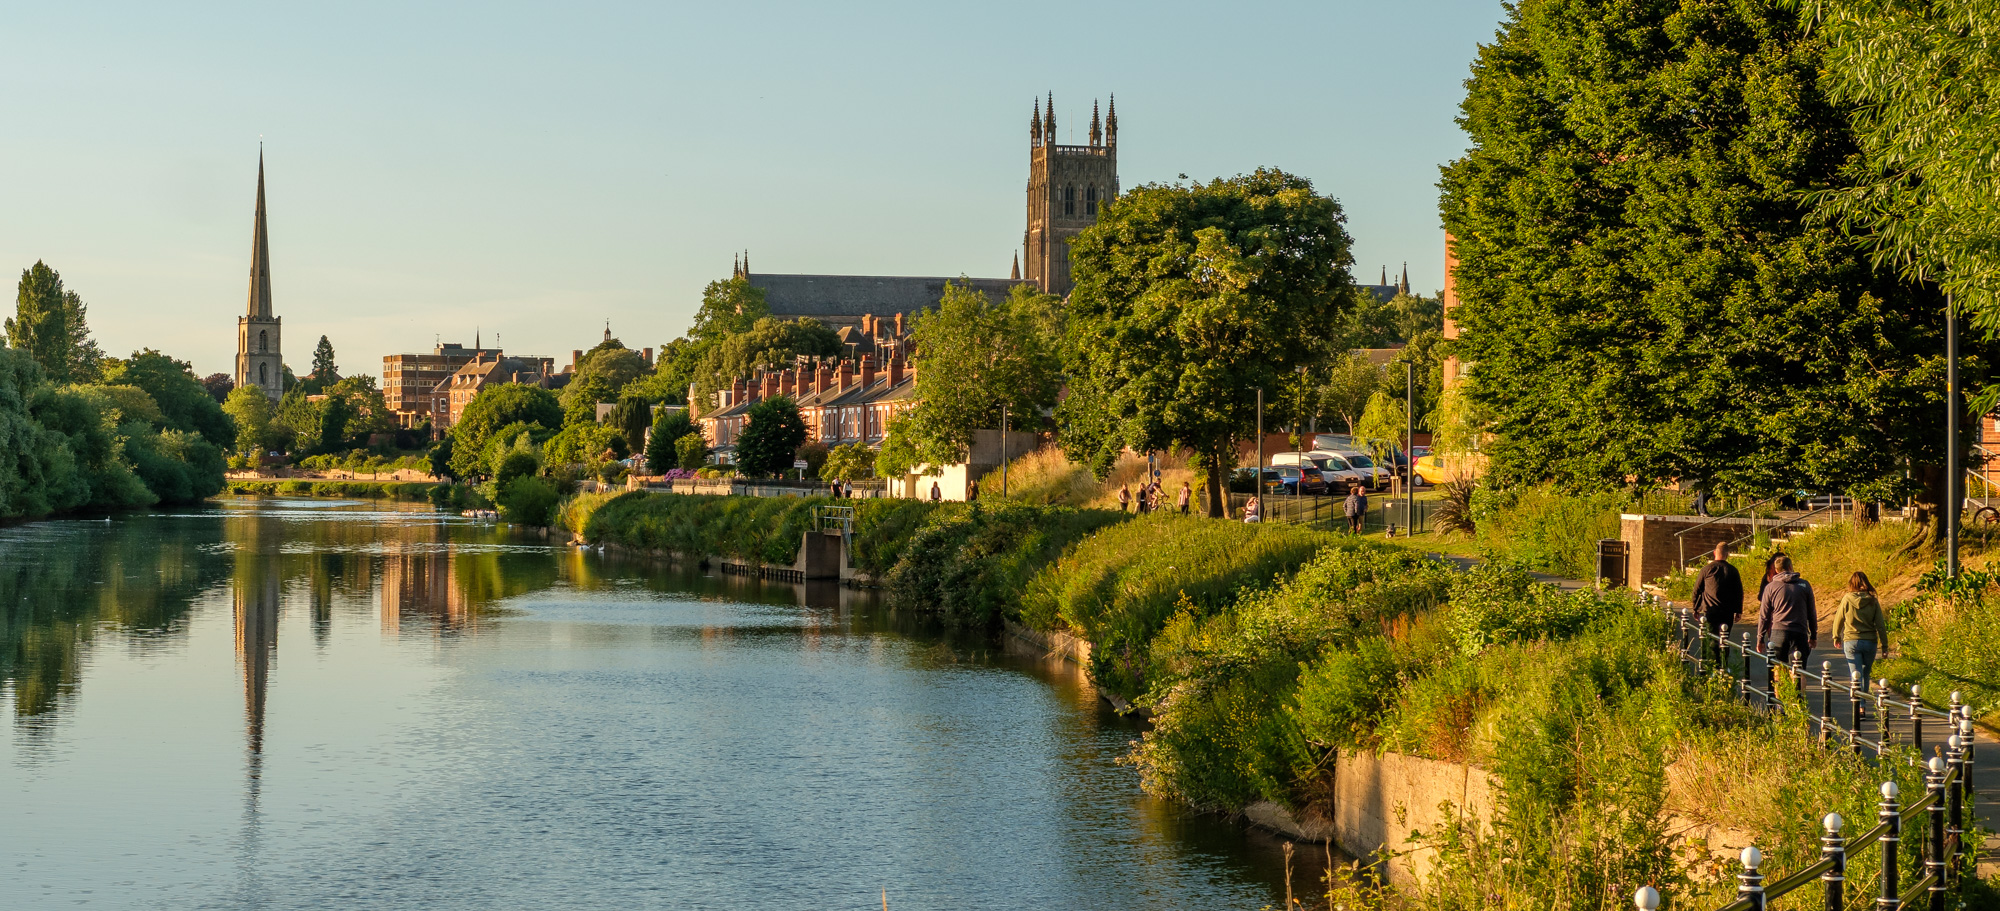 The river Severn with Worcester Cathedral in the background